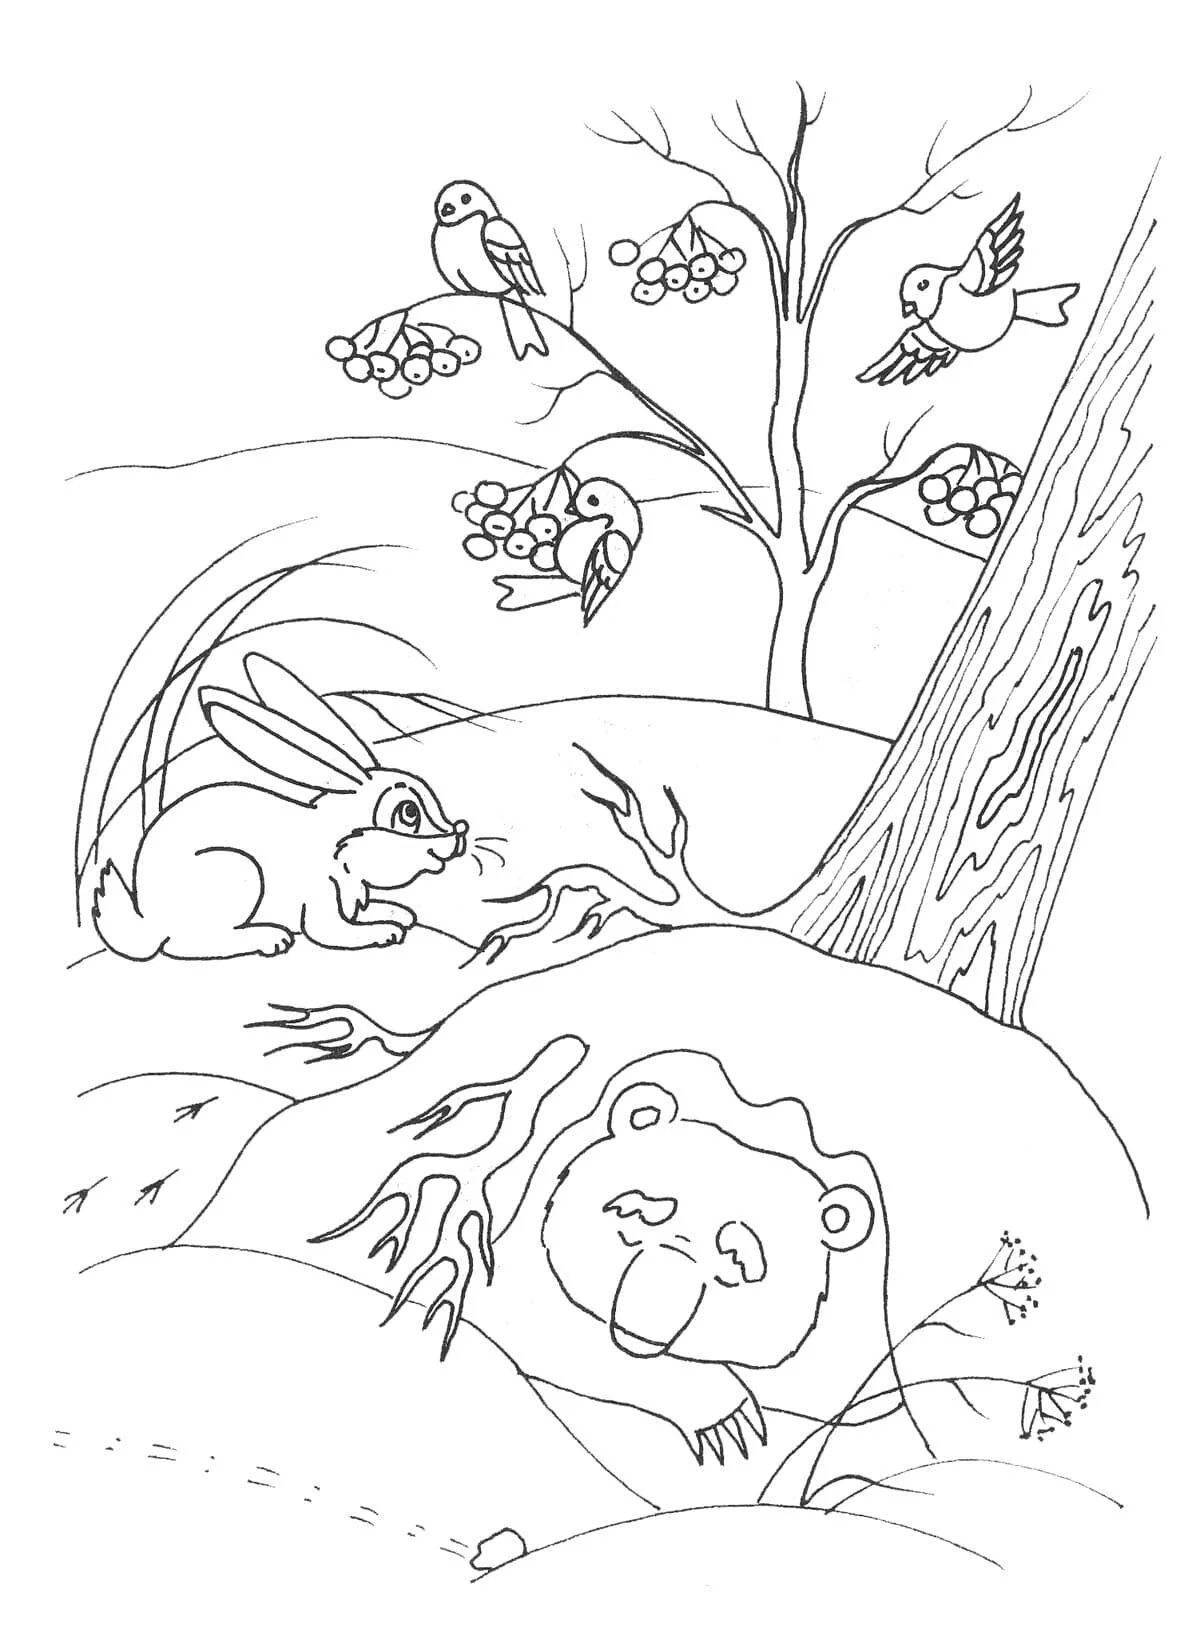 Amazing coloring pages of plants in winter